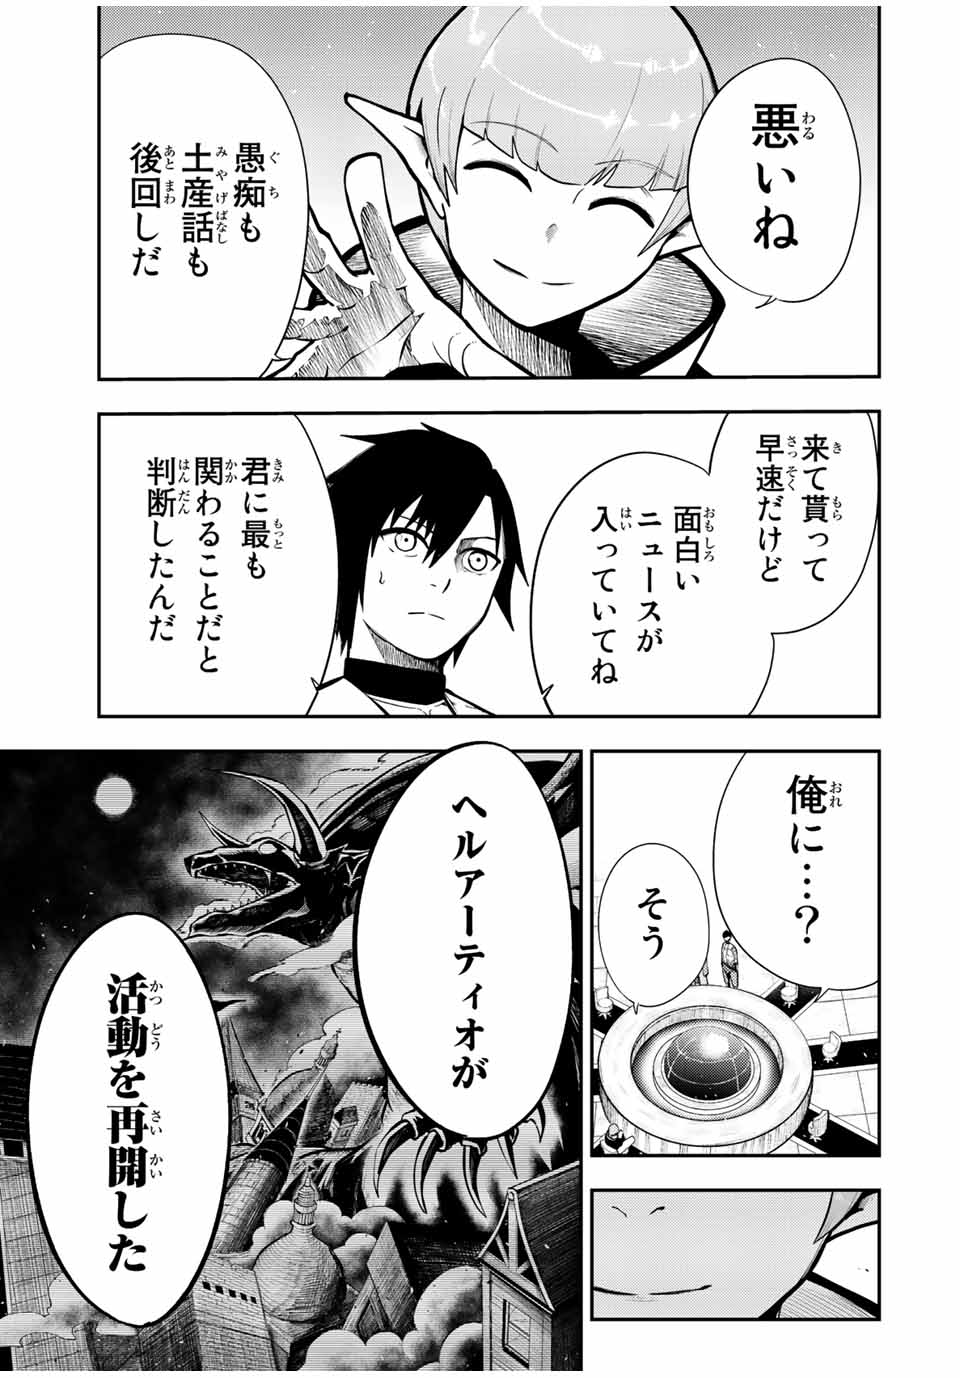 the strongest former prince-; 奴隷転生 ～その奴隷、最強の元王子につき～ 第78話 - Page 19